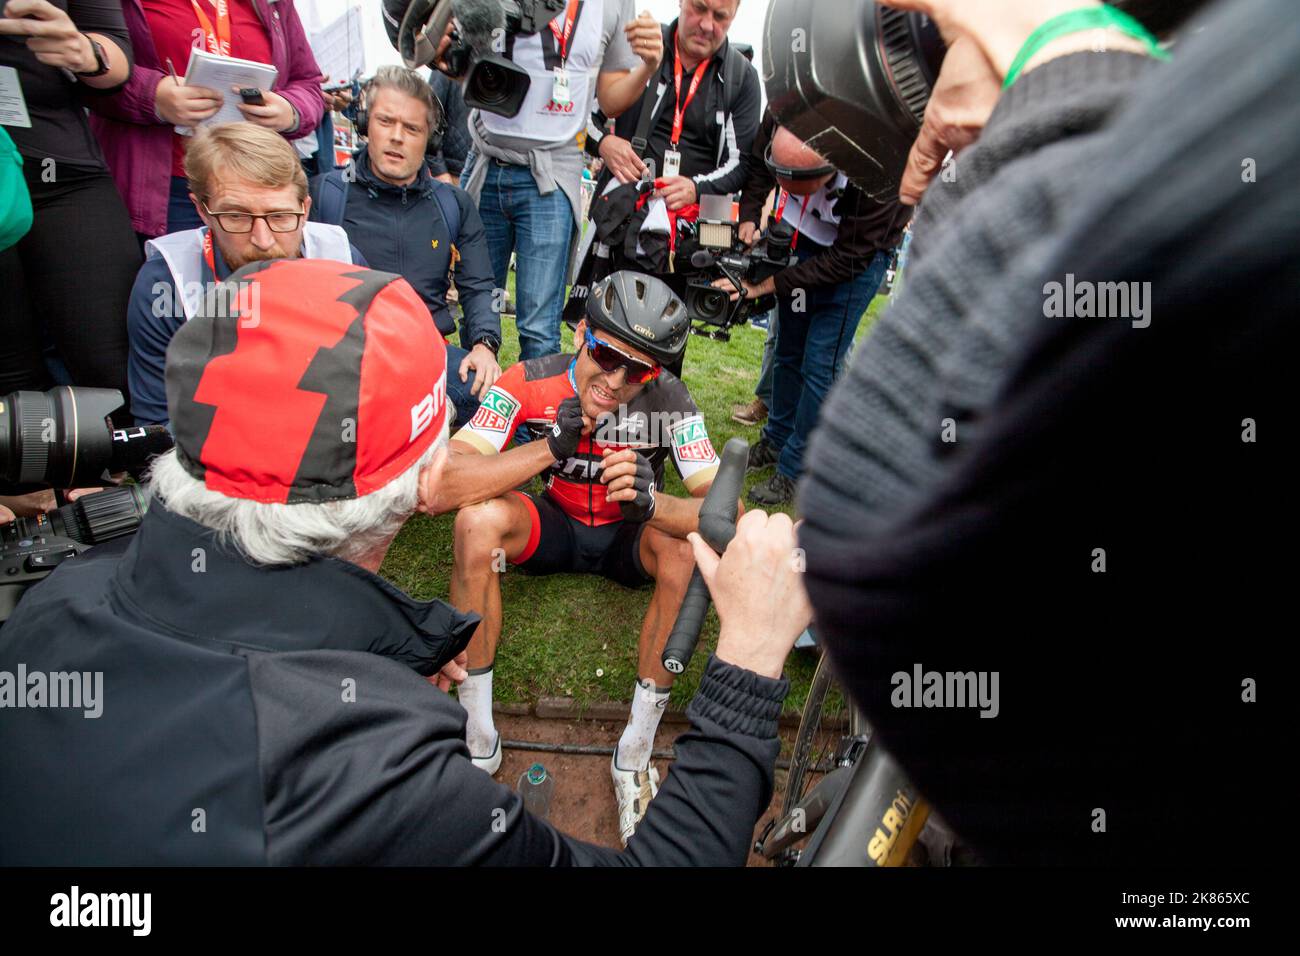 Greg Van Avermaet (BMC racing Team) is surround by the press after the finish of a very tough Paris Roubaix Stock Photo